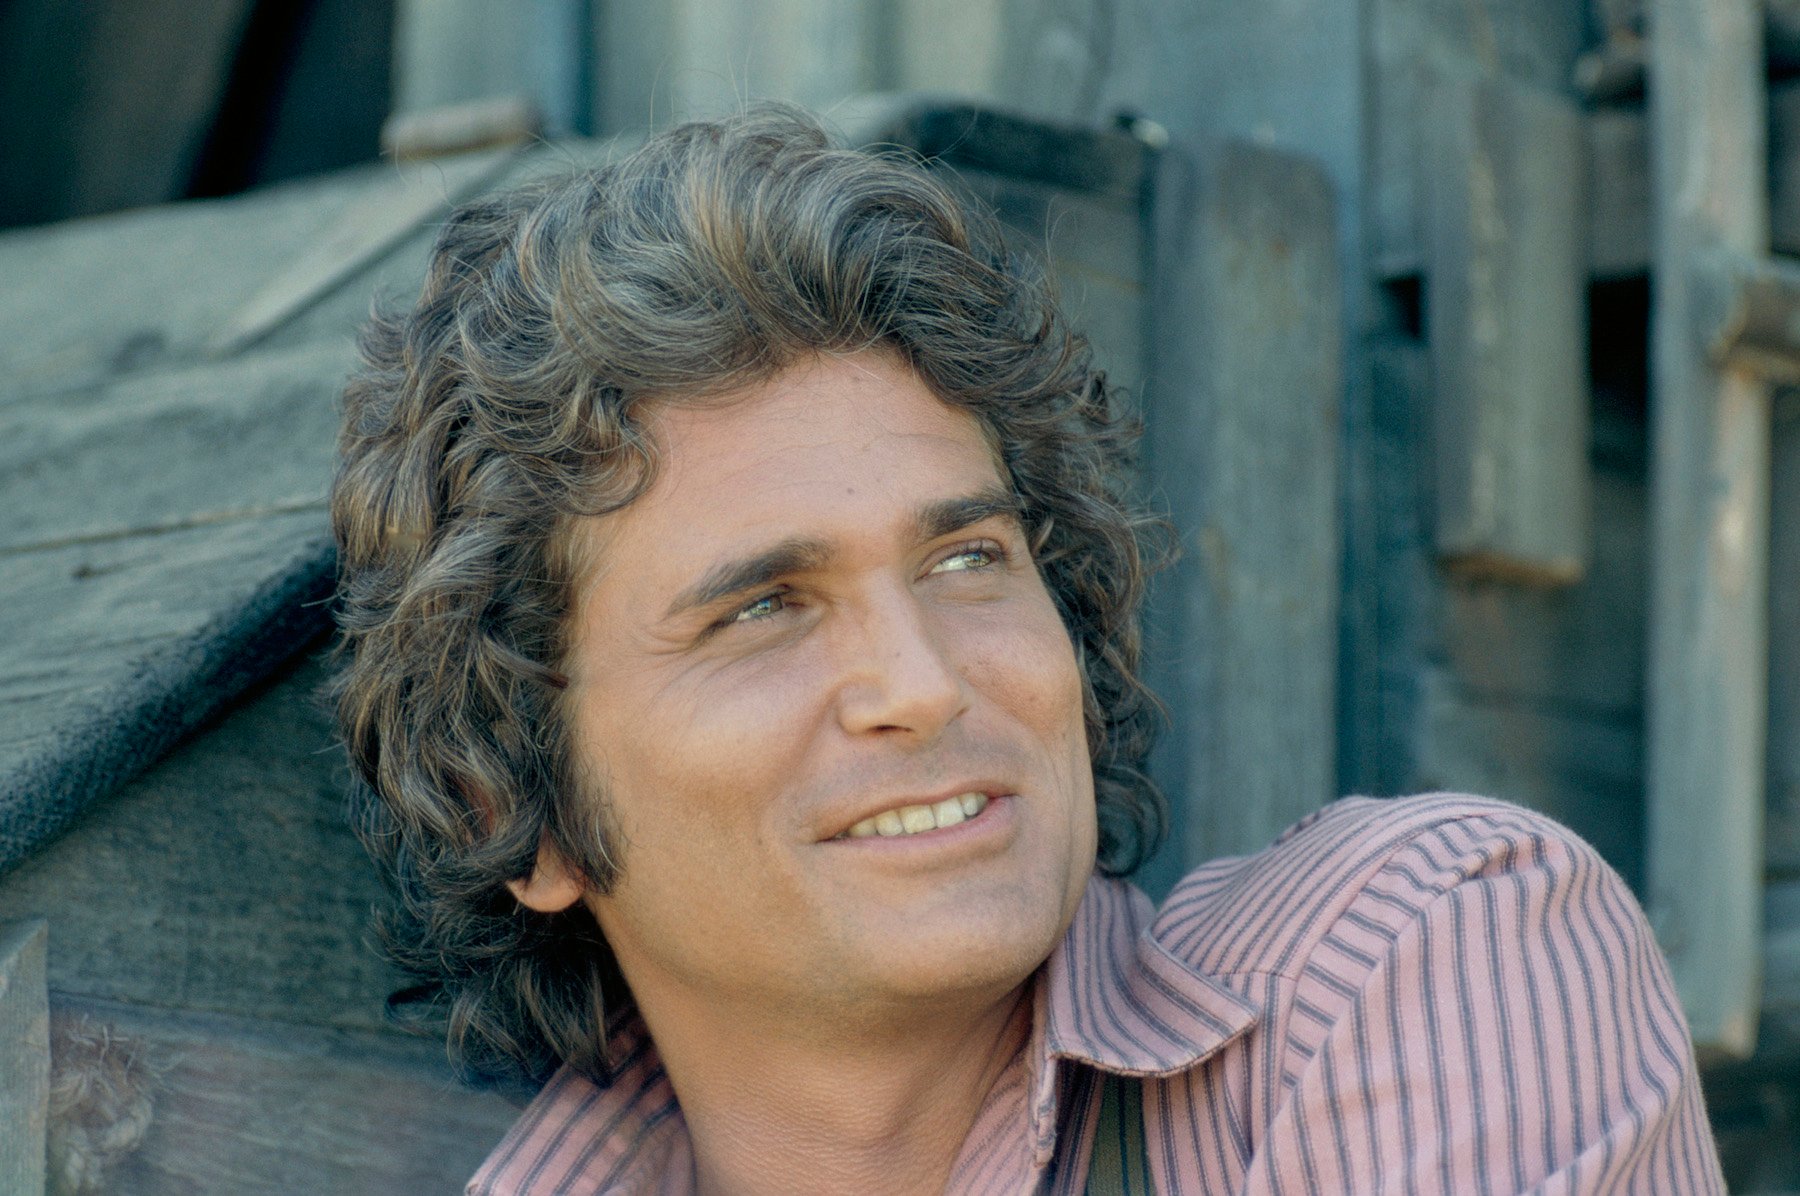 Michael Landon as Charles Philip Ingalls on 'Little House on the Prairie' 